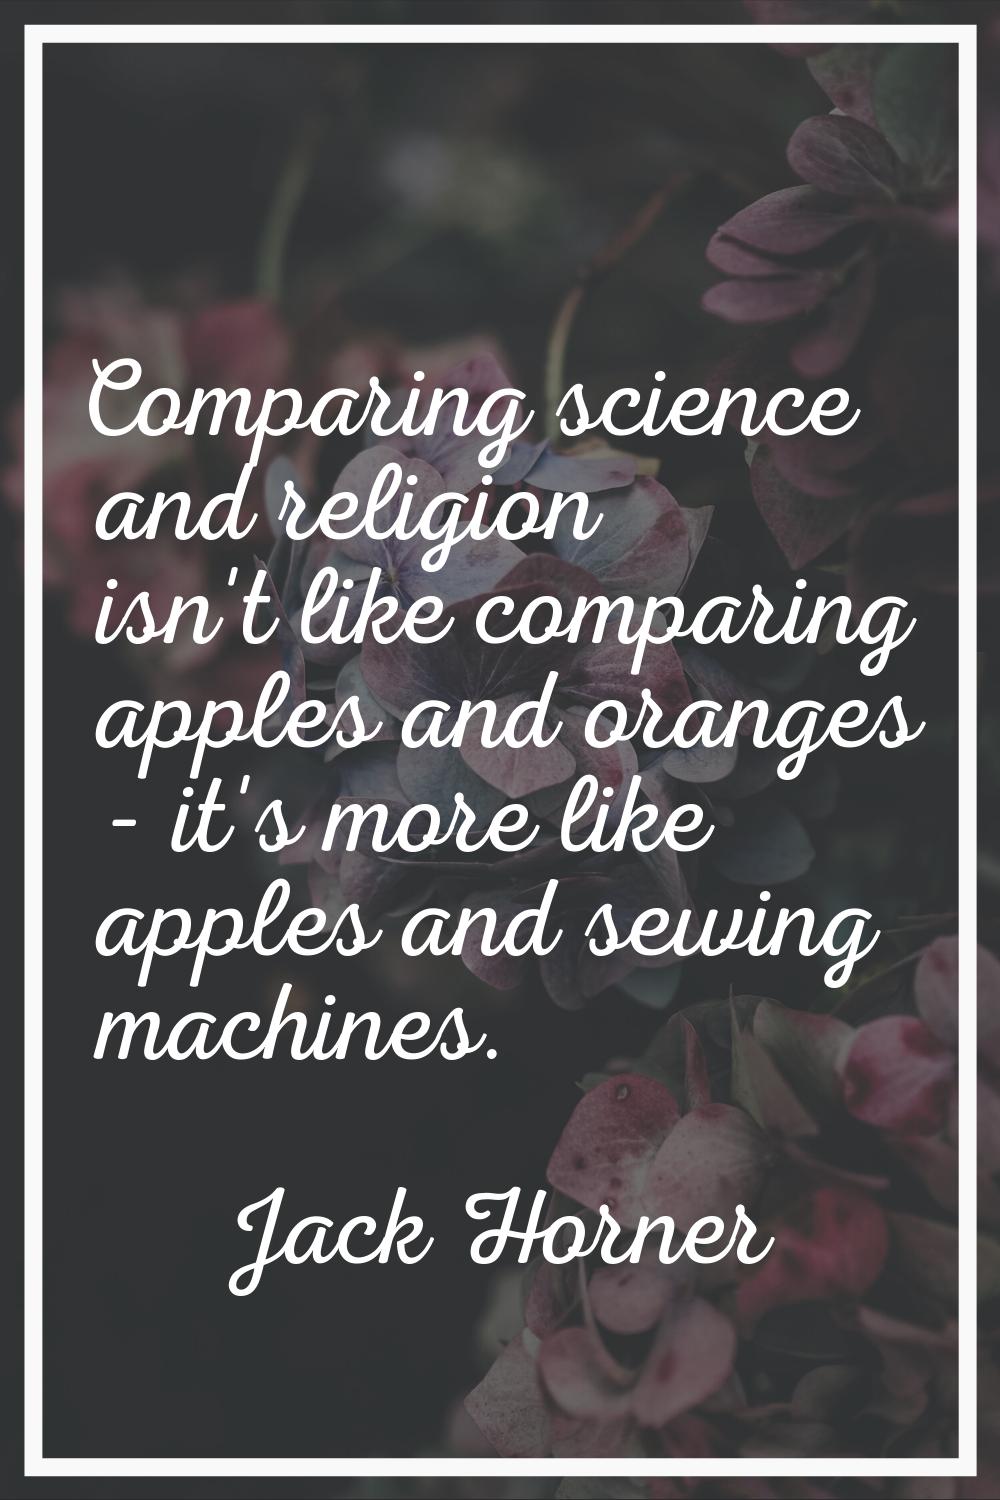 Comparing science and religion isn't like comparing apples and oranges - it's more like apples and 